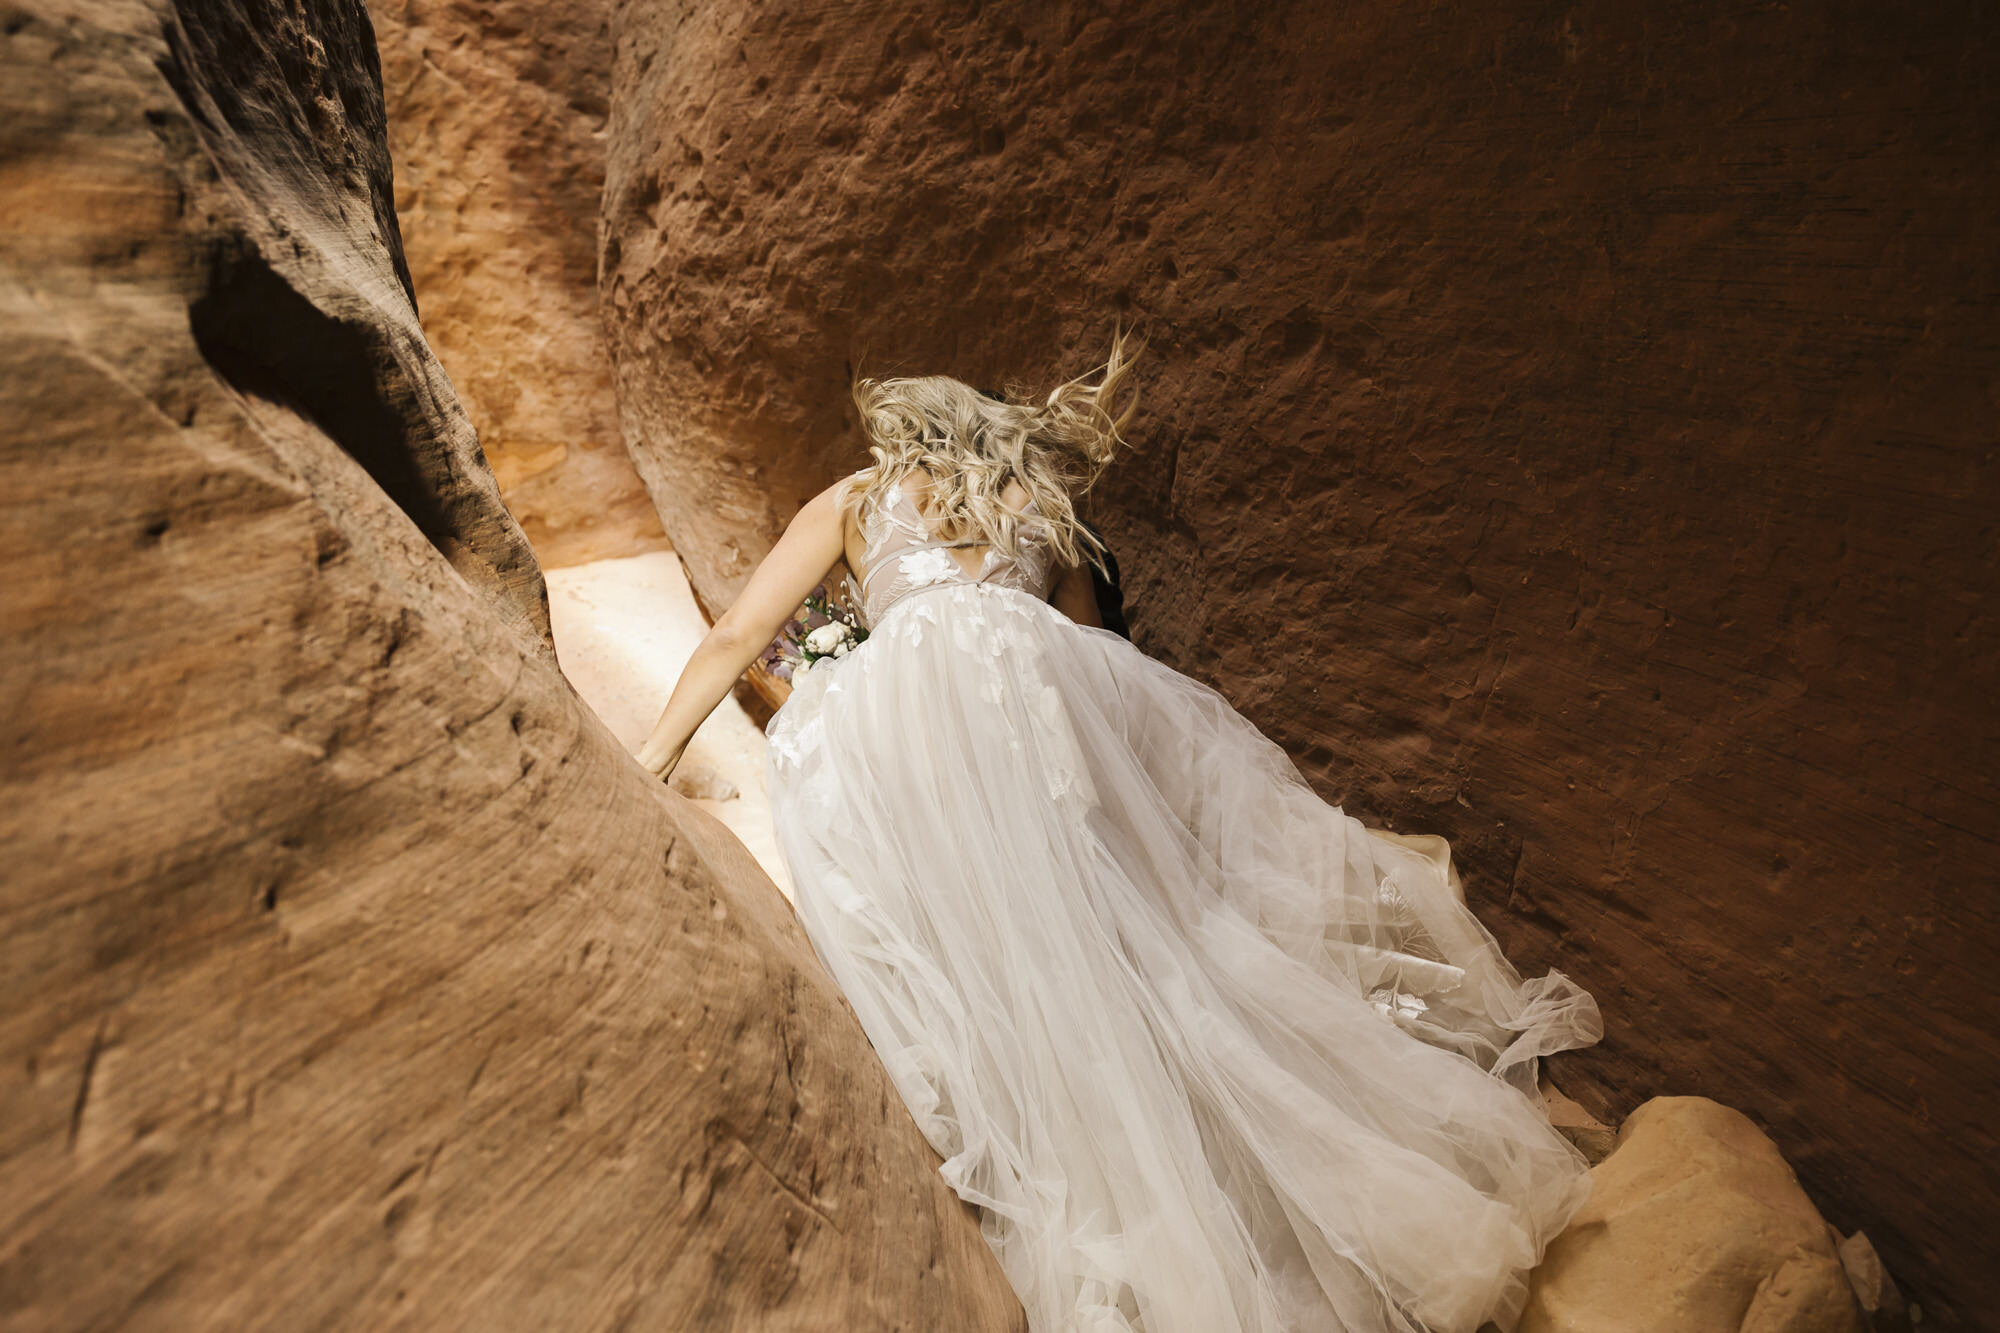 Bride jumps down while navigating a slot canyon in the Utah desert